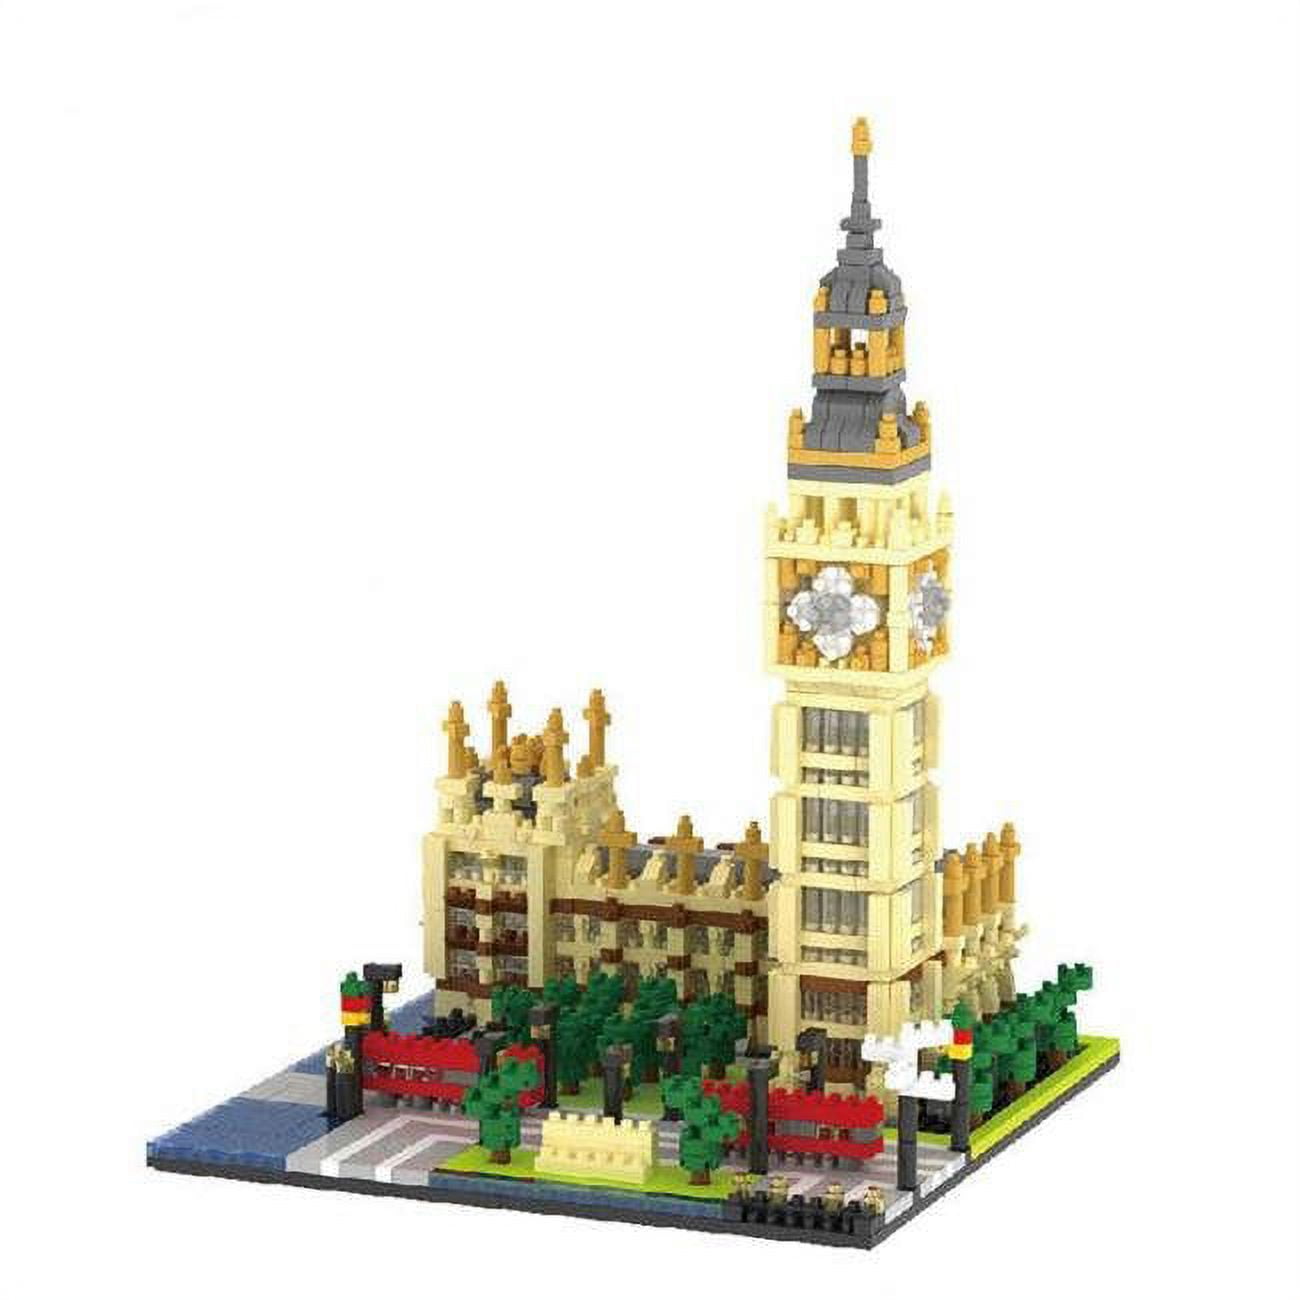 Picture of WL Toys YZ058 The Big Ben Tower in London Micro Blocks Set